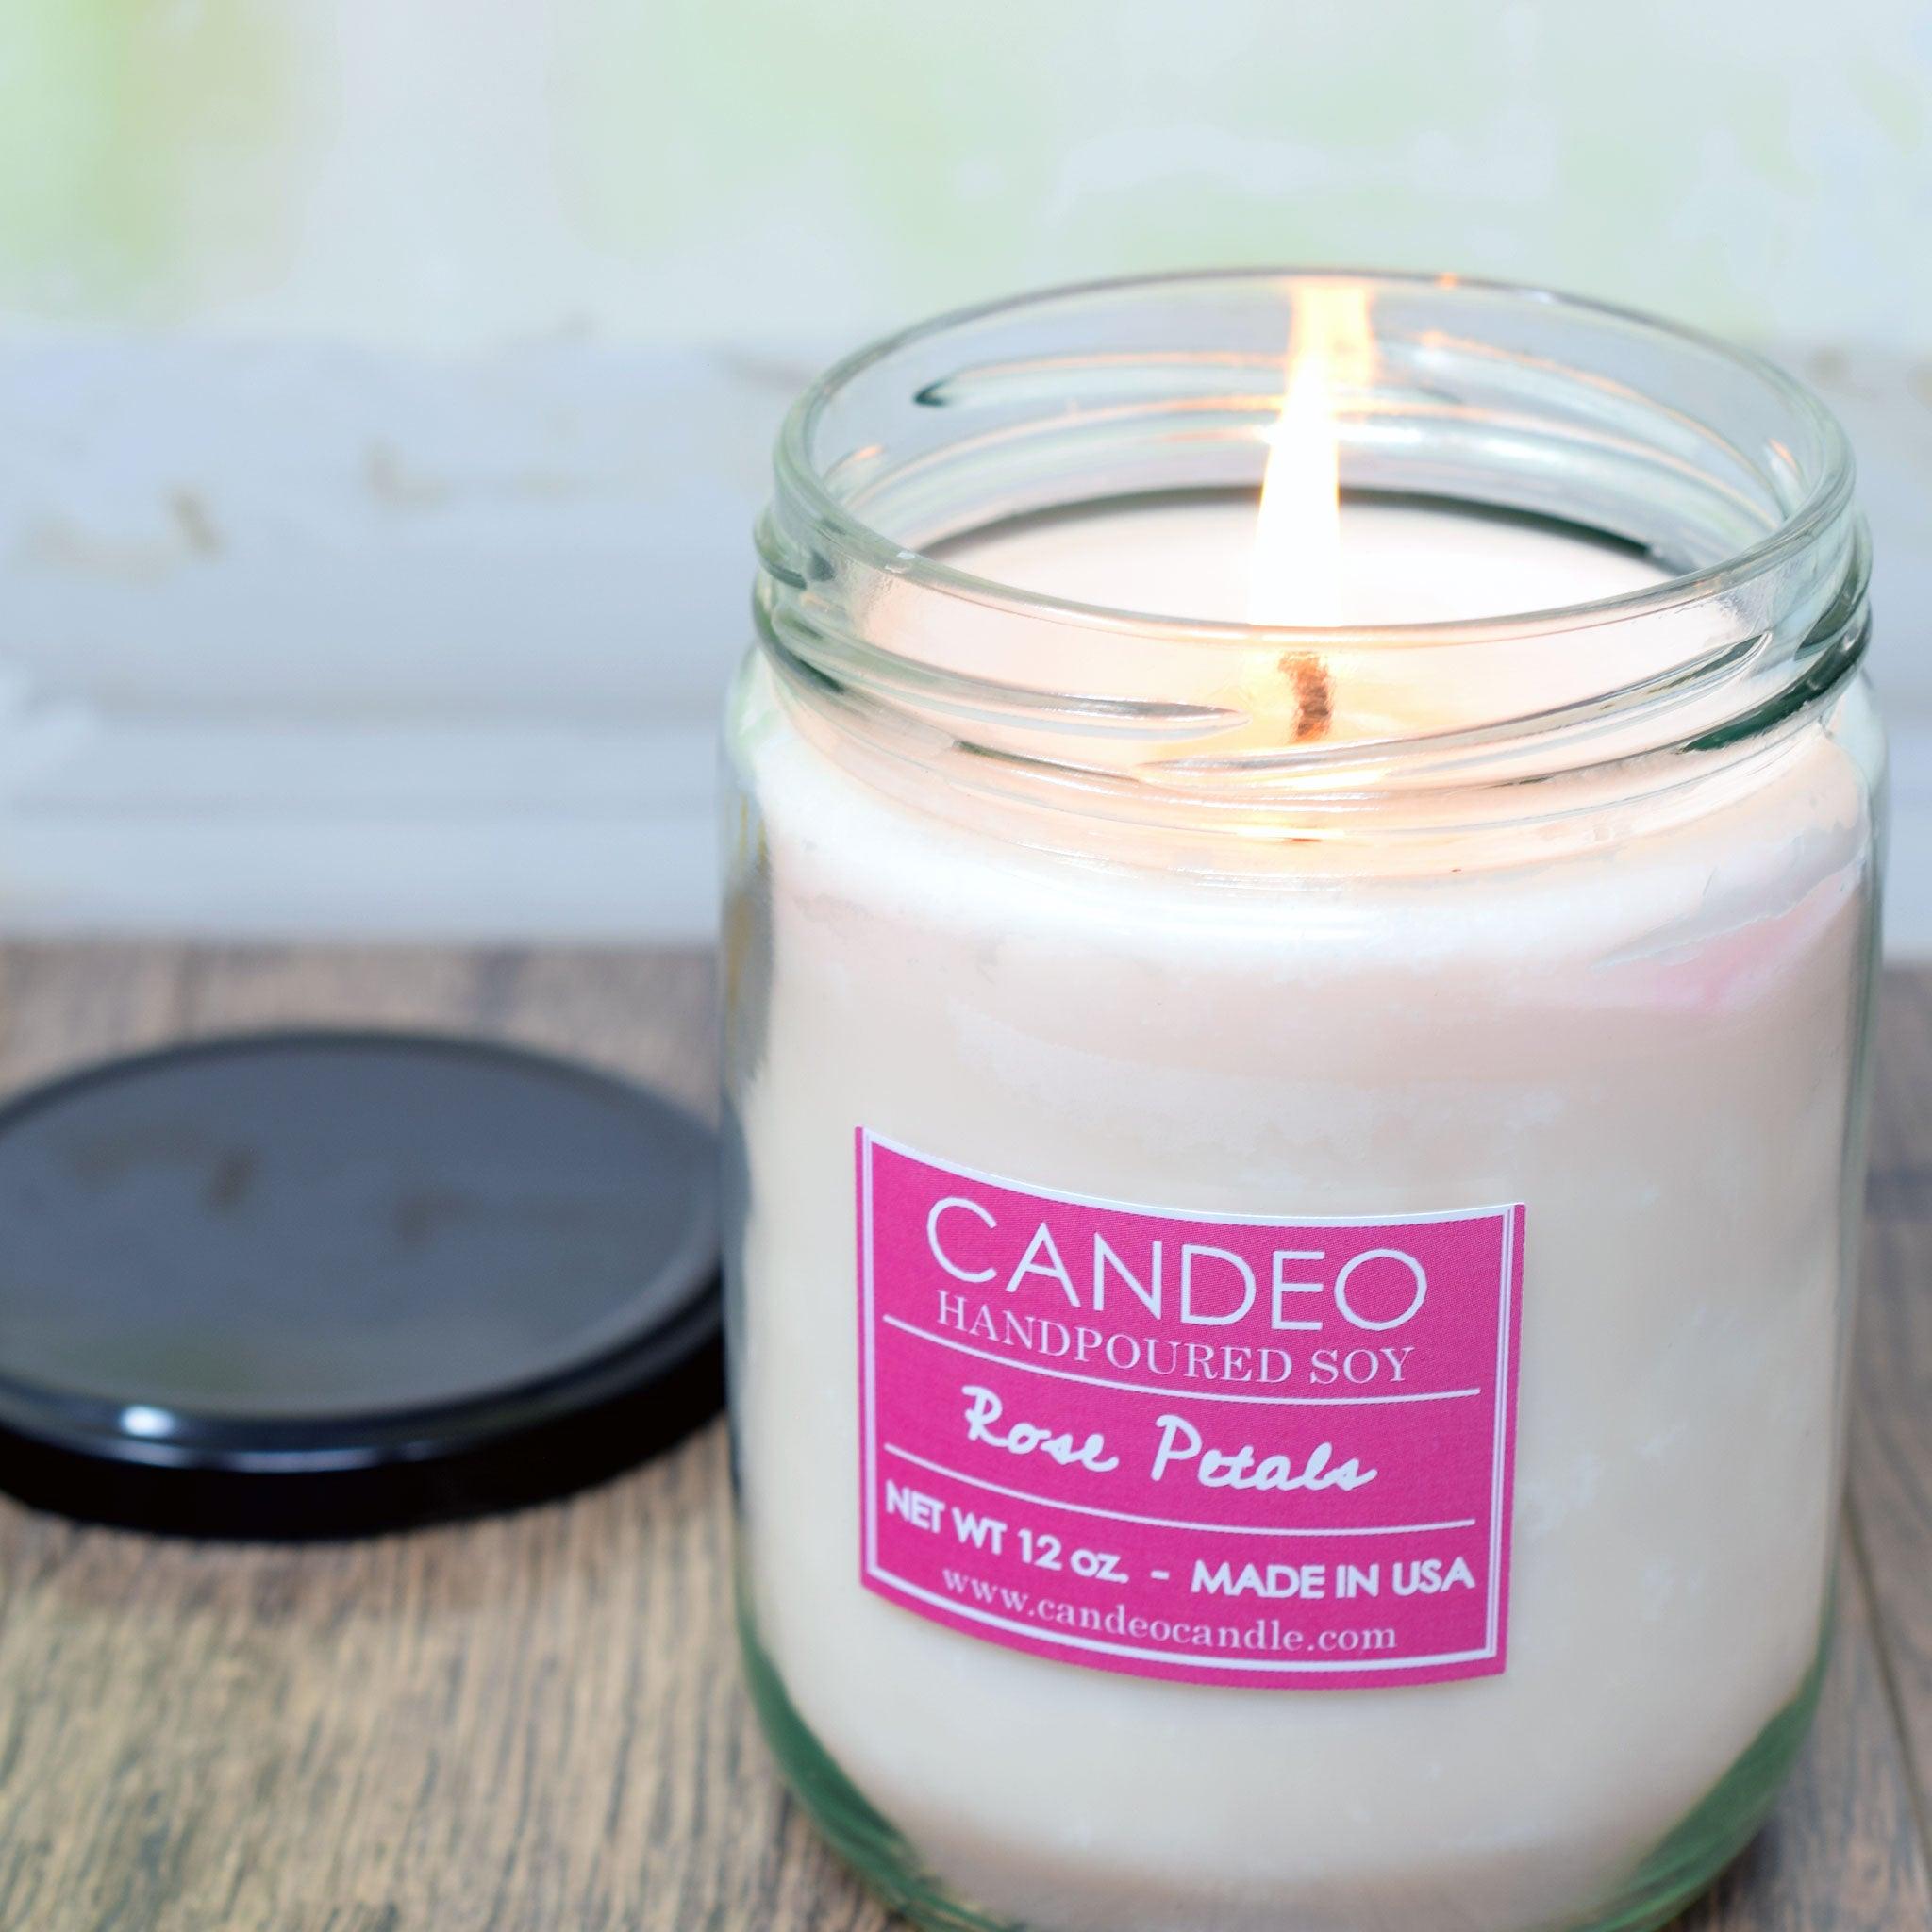 Snickerdoodles, 14oz Soy Candle Jar - Candeo Candle